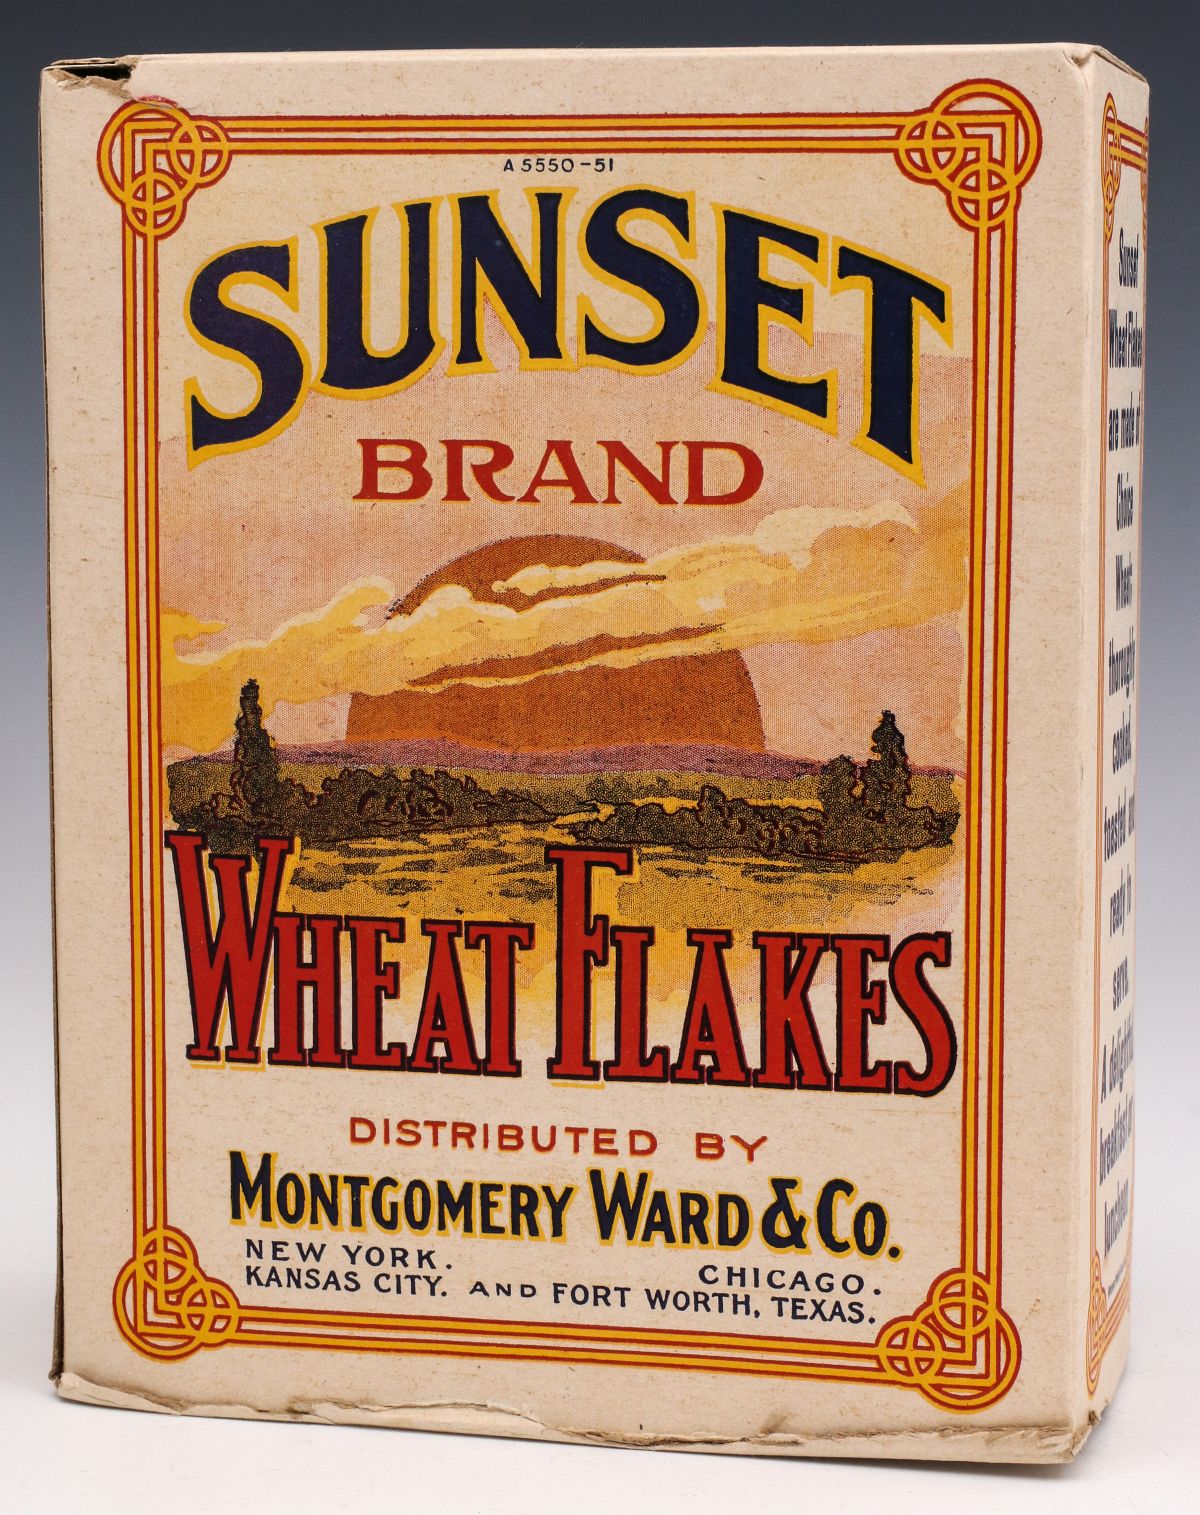 SUNSET BRAND WHEAT FLAKES BOX FOR MONTGOMERY WARD